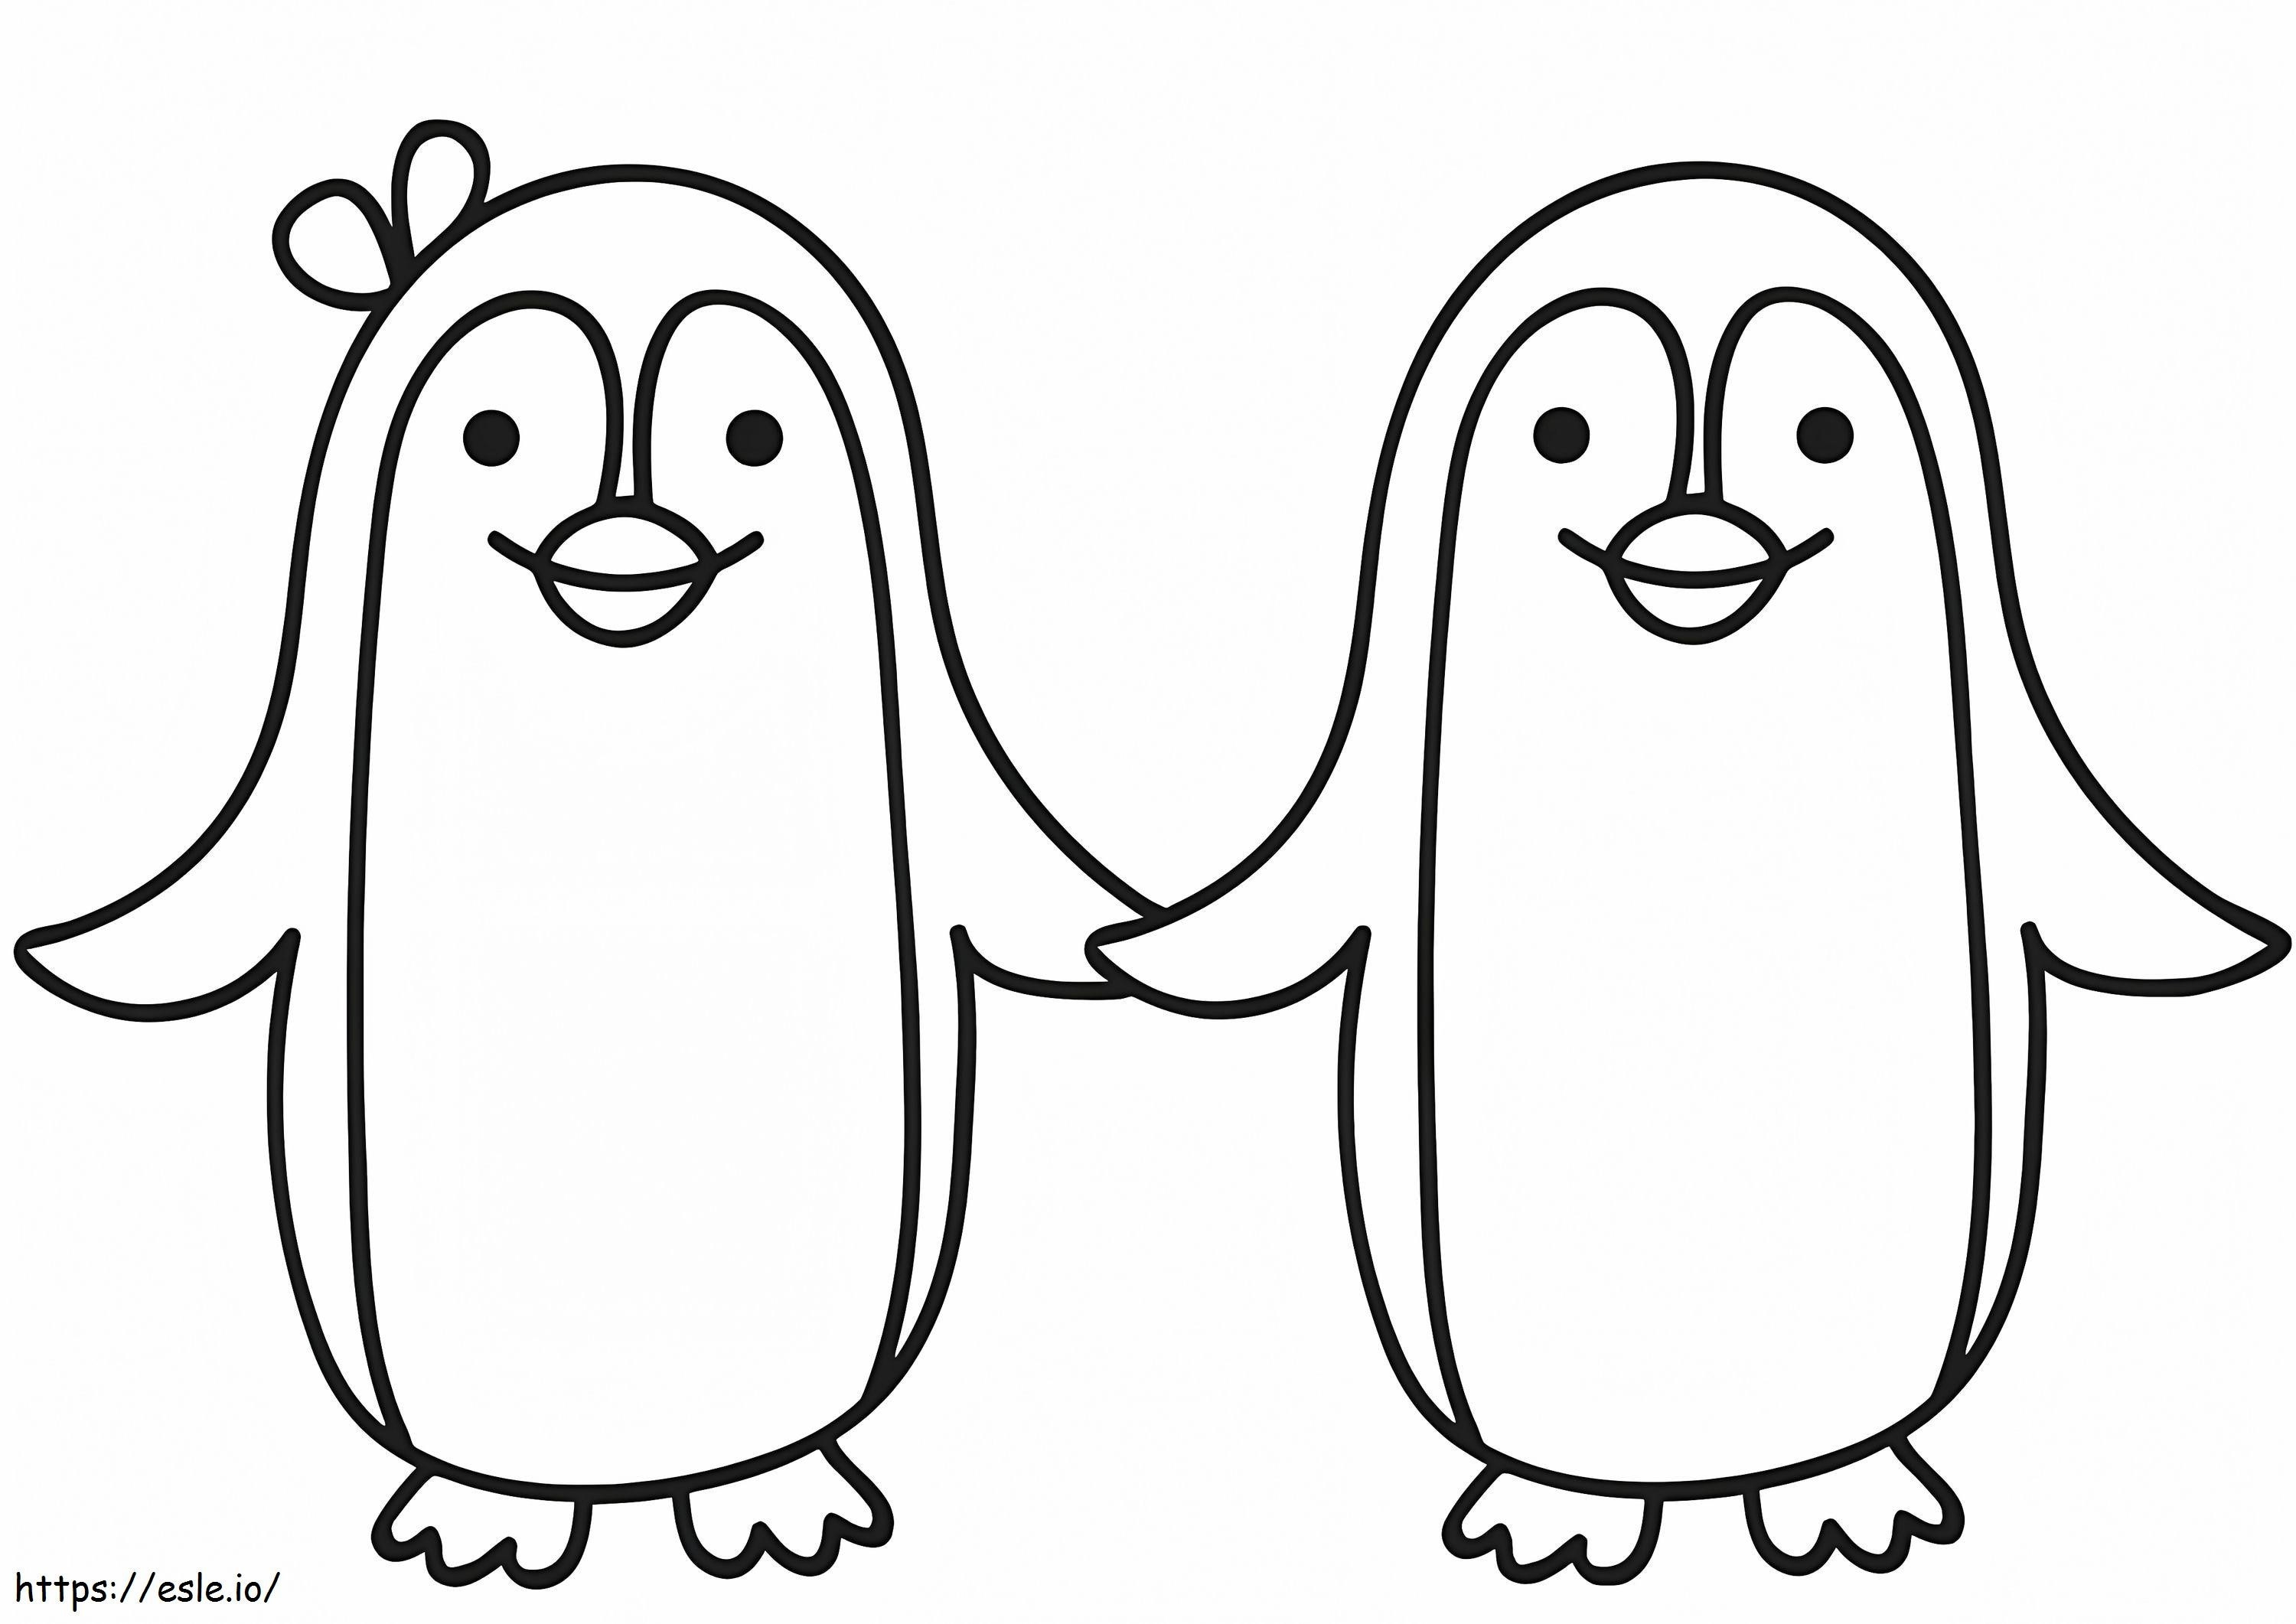 Penguin Couple coloring page